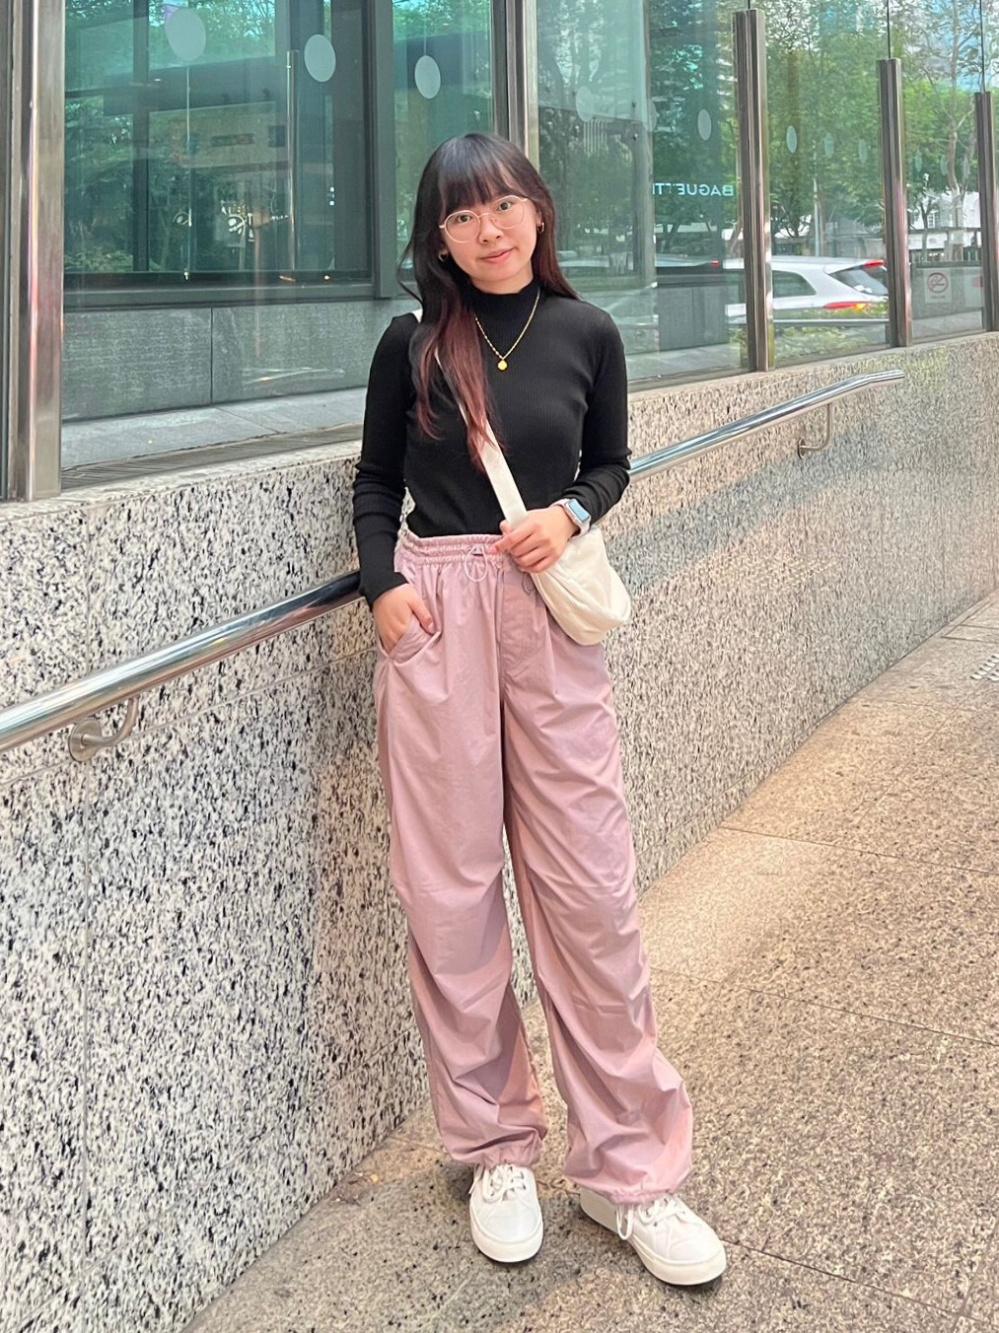 Fall Cargo pants outfit idea  Pink pants outfit, Pants outfit